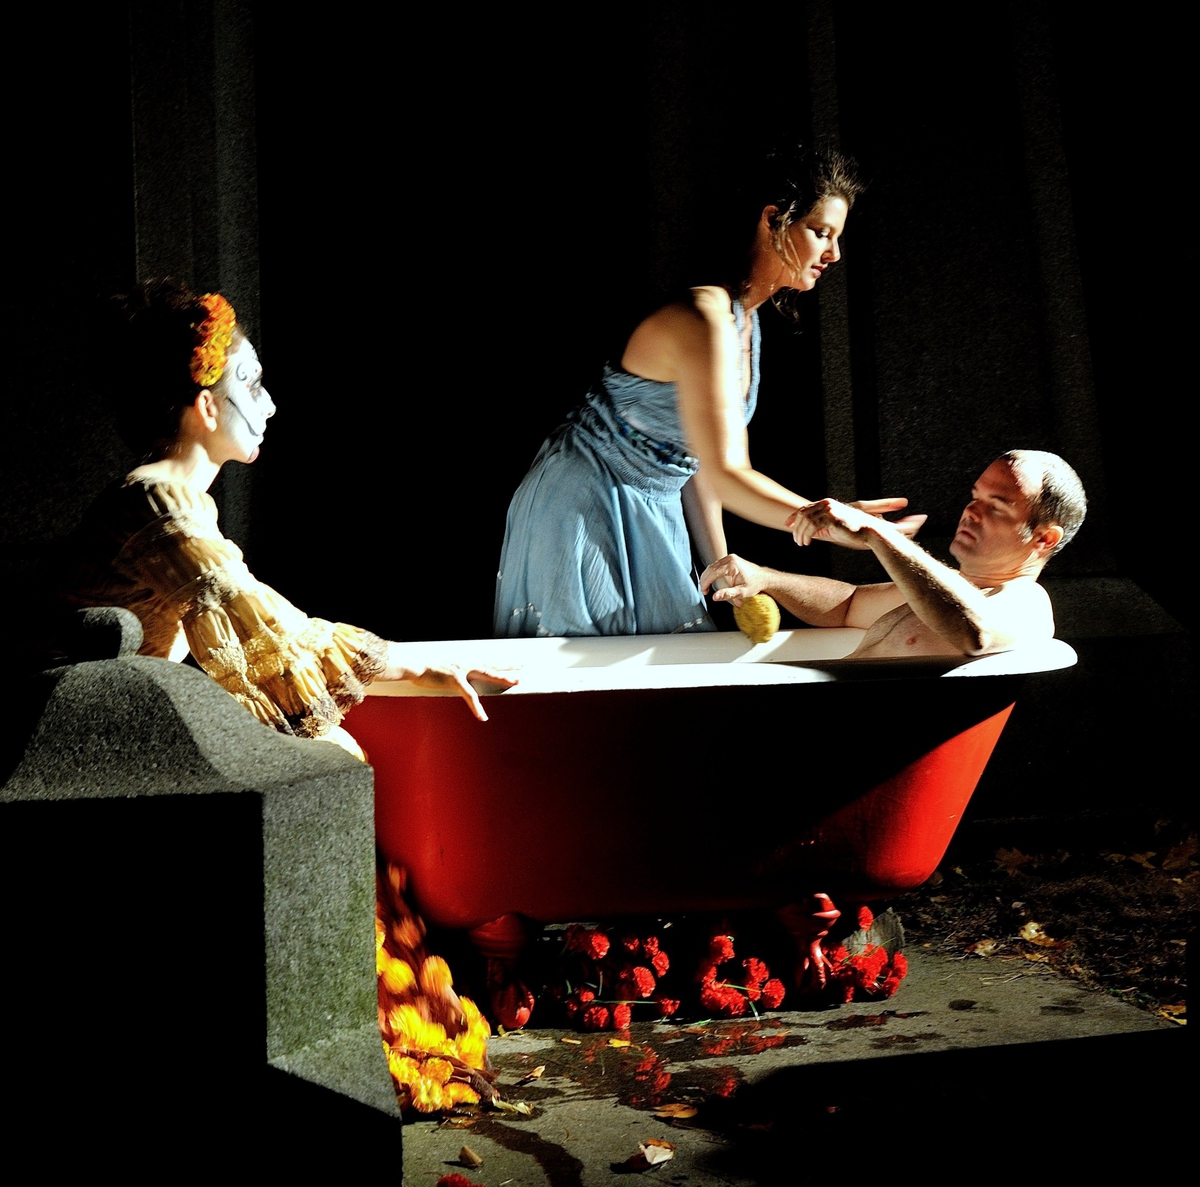 Act 1 of "Memento Mori", an immersive theater experience about life and death.